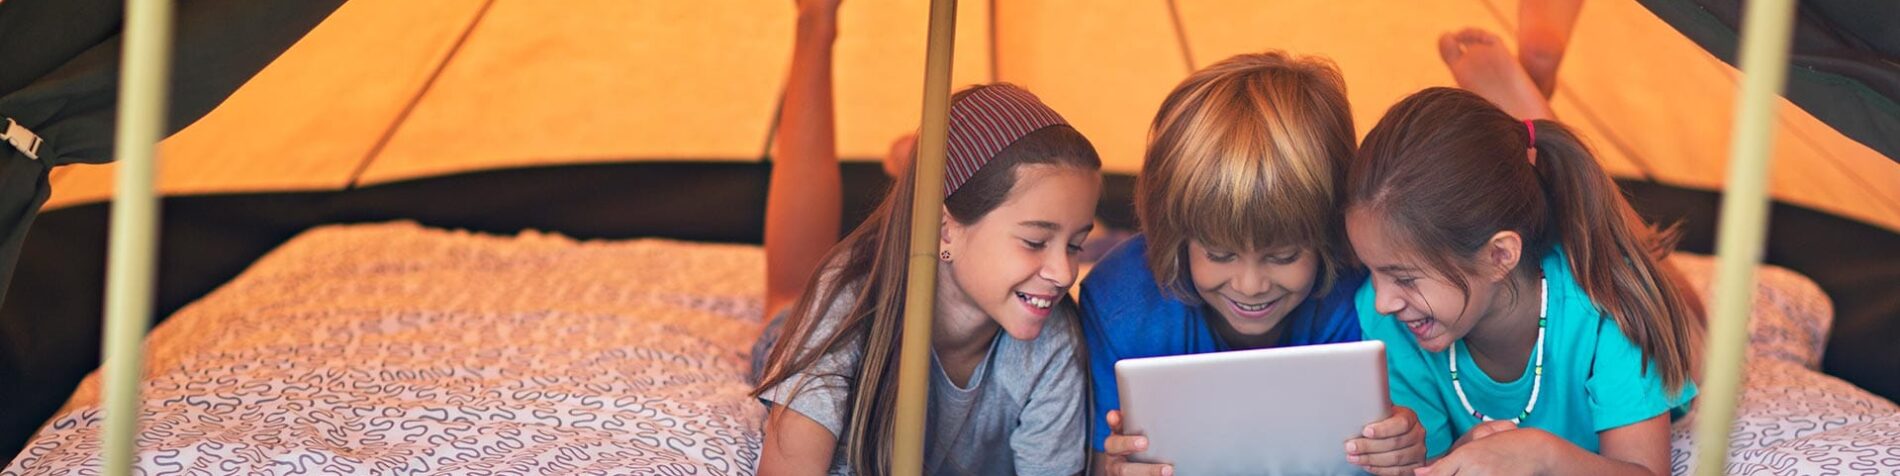 SAPPHIRE NOW Unplugged: Girl Scouts Innovate Iconic Cookie Sales and More for Digital World